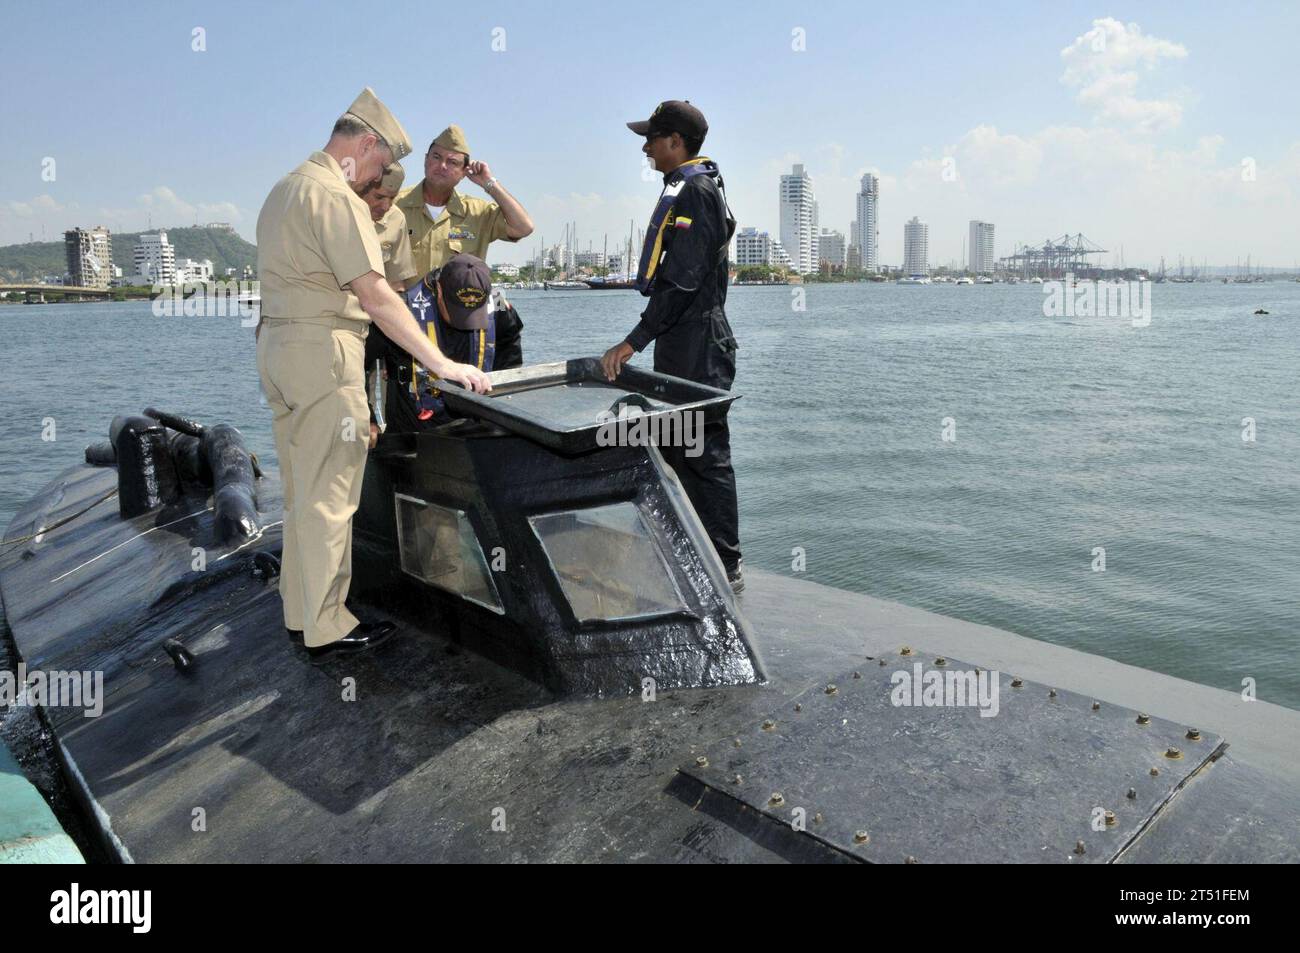 0912058273J-174 CARTAGENA, Colombia (Dec. 5, 2009) Chief of Naval Operations (CNO) Adm. Gary Roughead, left, tours a semi-submersible boat while meeting with Colombian Coast Guard Forces at Naval Base Bolivar. The boat was seized from drug smugglers in the Caribbean. Navy Stock Photo